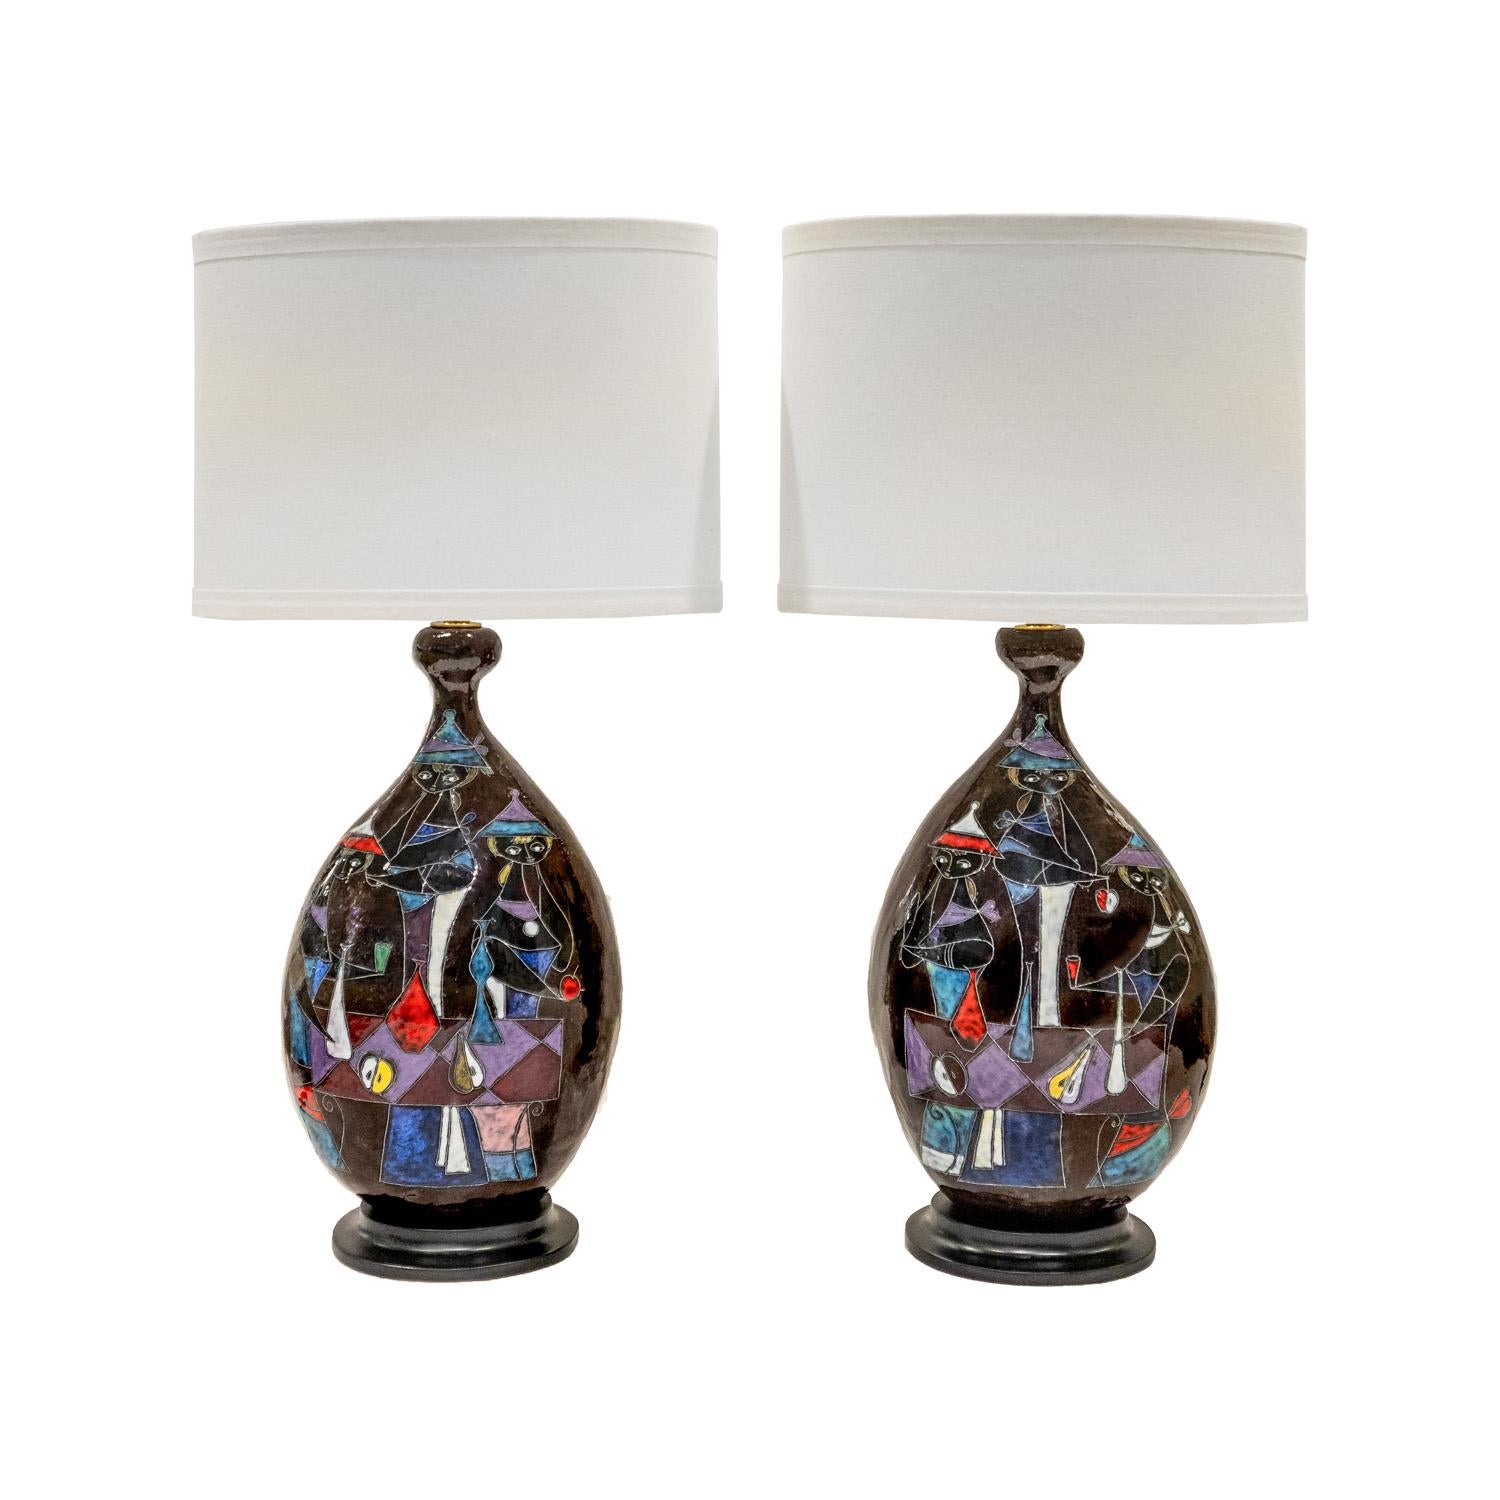 Superb pair of hand-thrown and painted ceramic table lamps, each with a colorful figural motif,  on ebonized wood bases by Marcello Fantoni, Italian 1950's (signed).  These are rare and important works by the artist.  They are absolutely stunning in